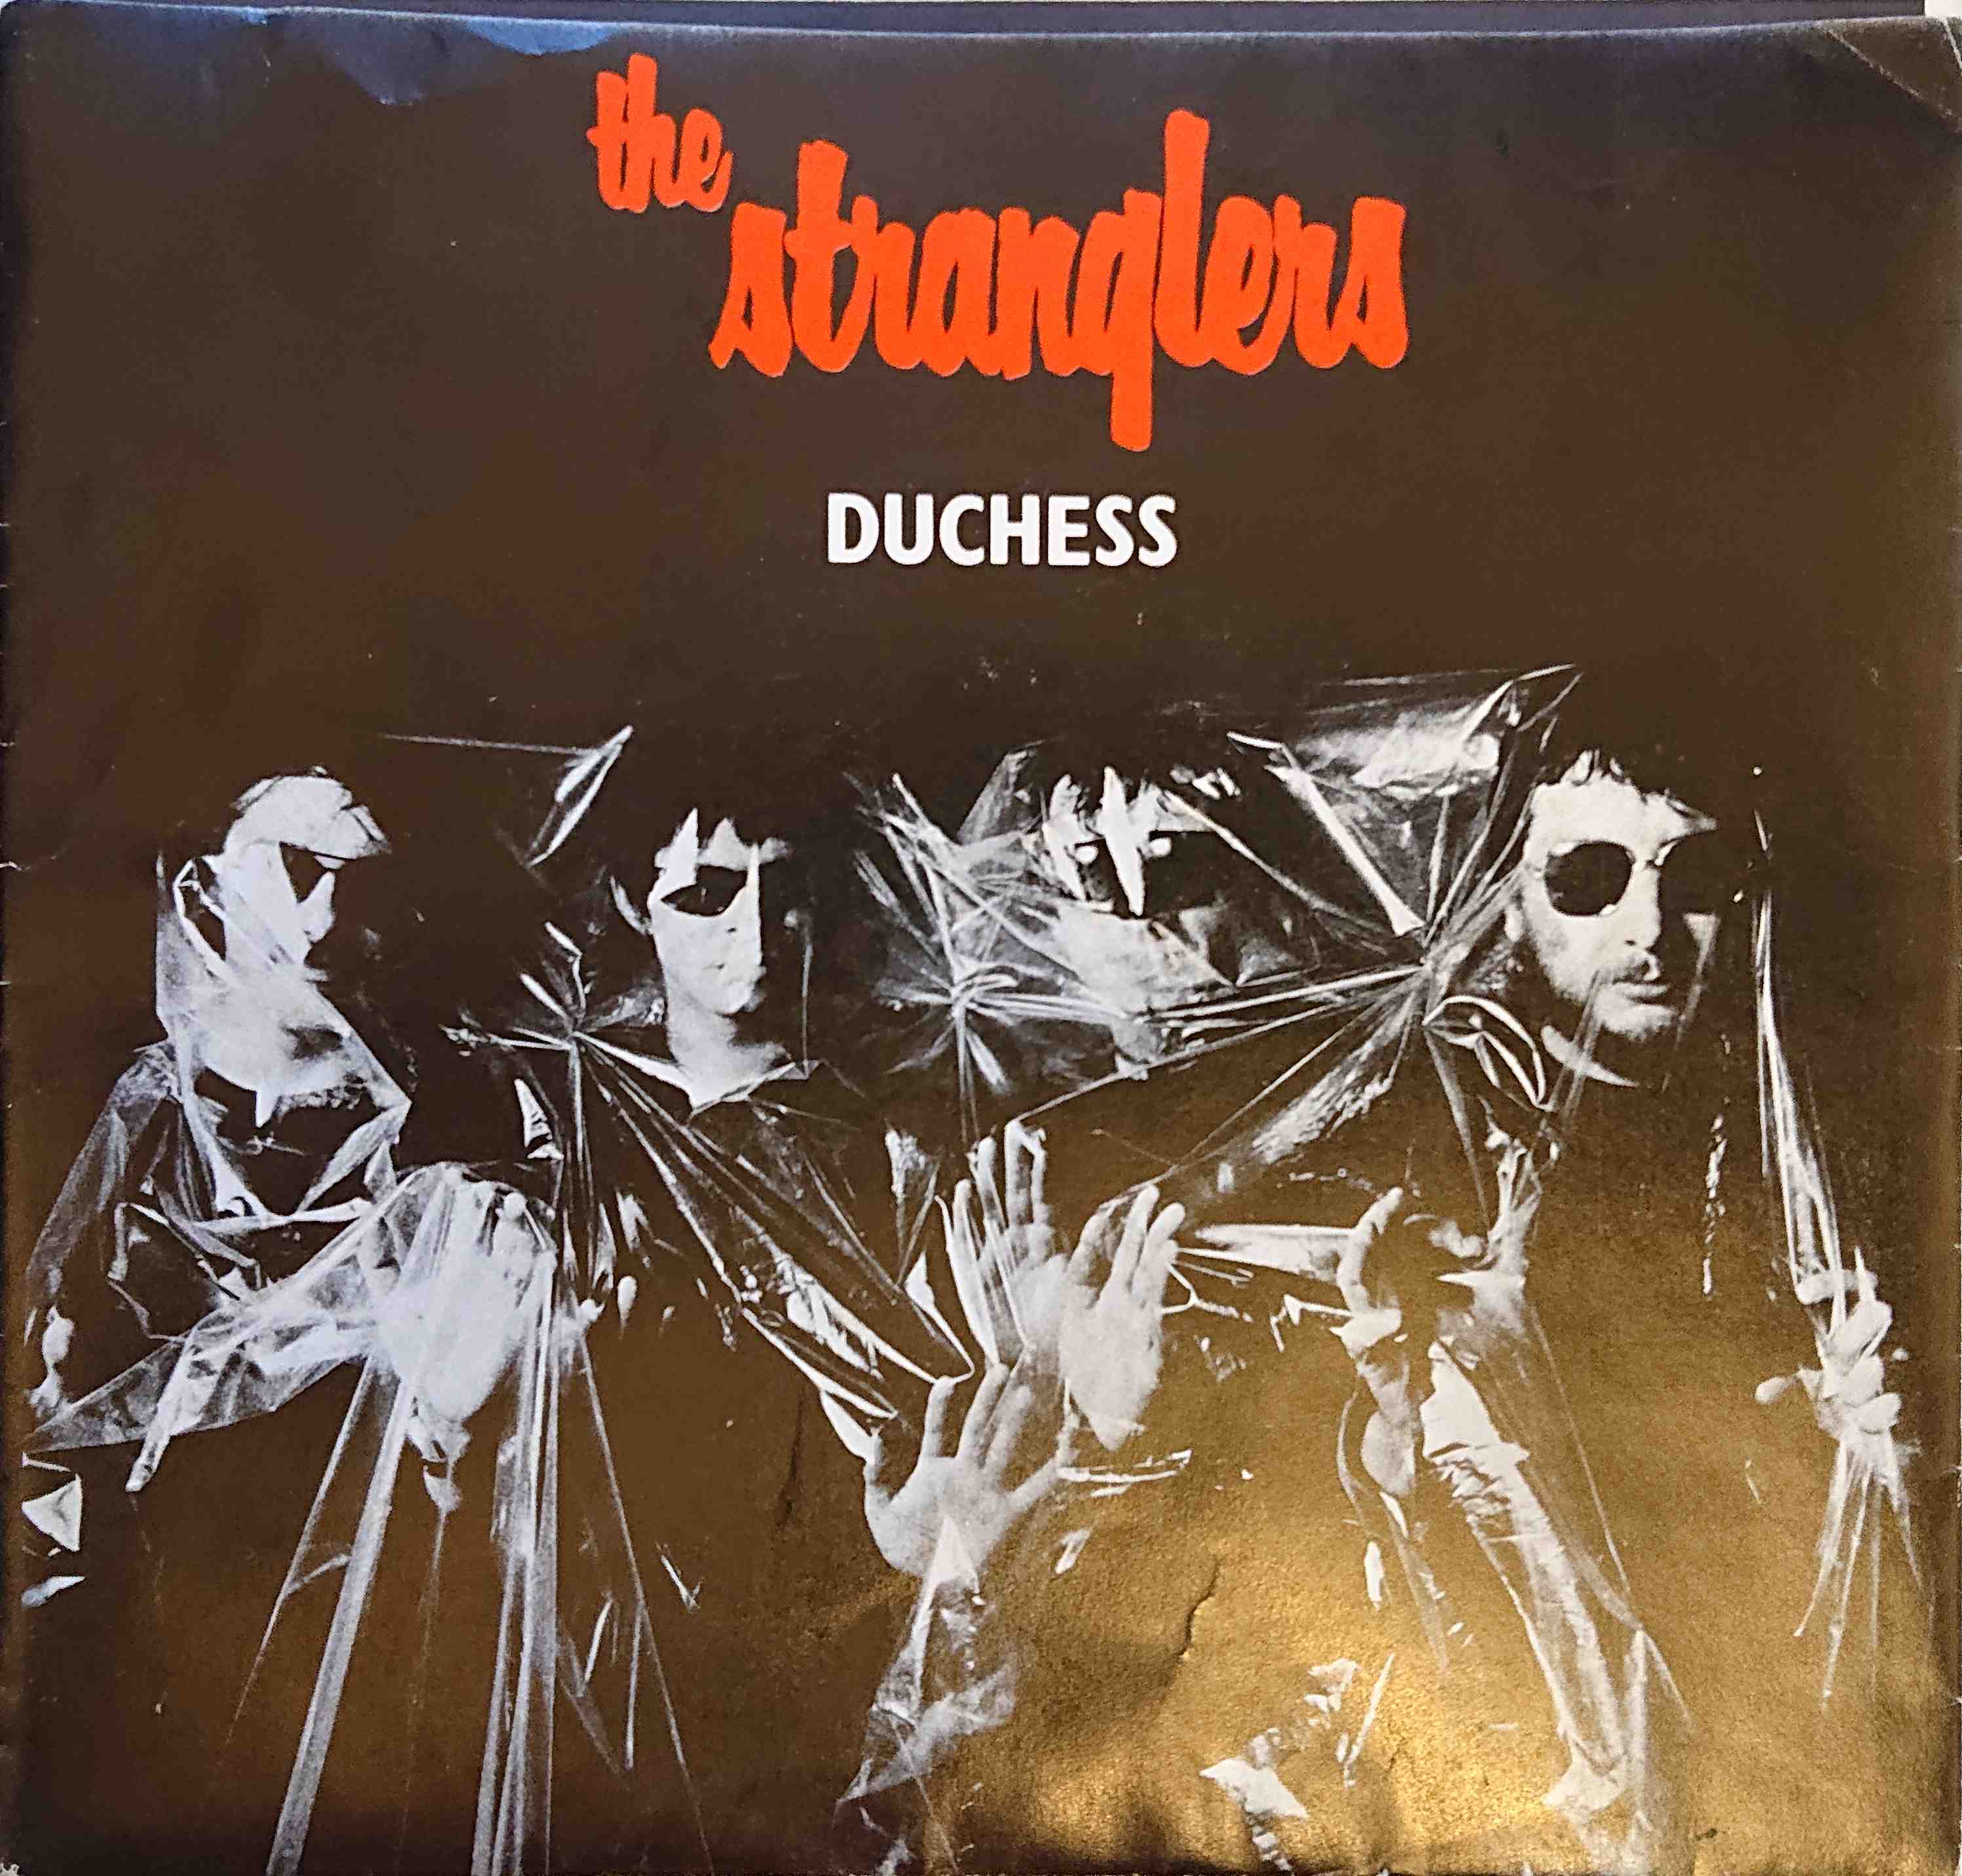 Picture of Duchess by artist The Stranglers from The Stranglers singles